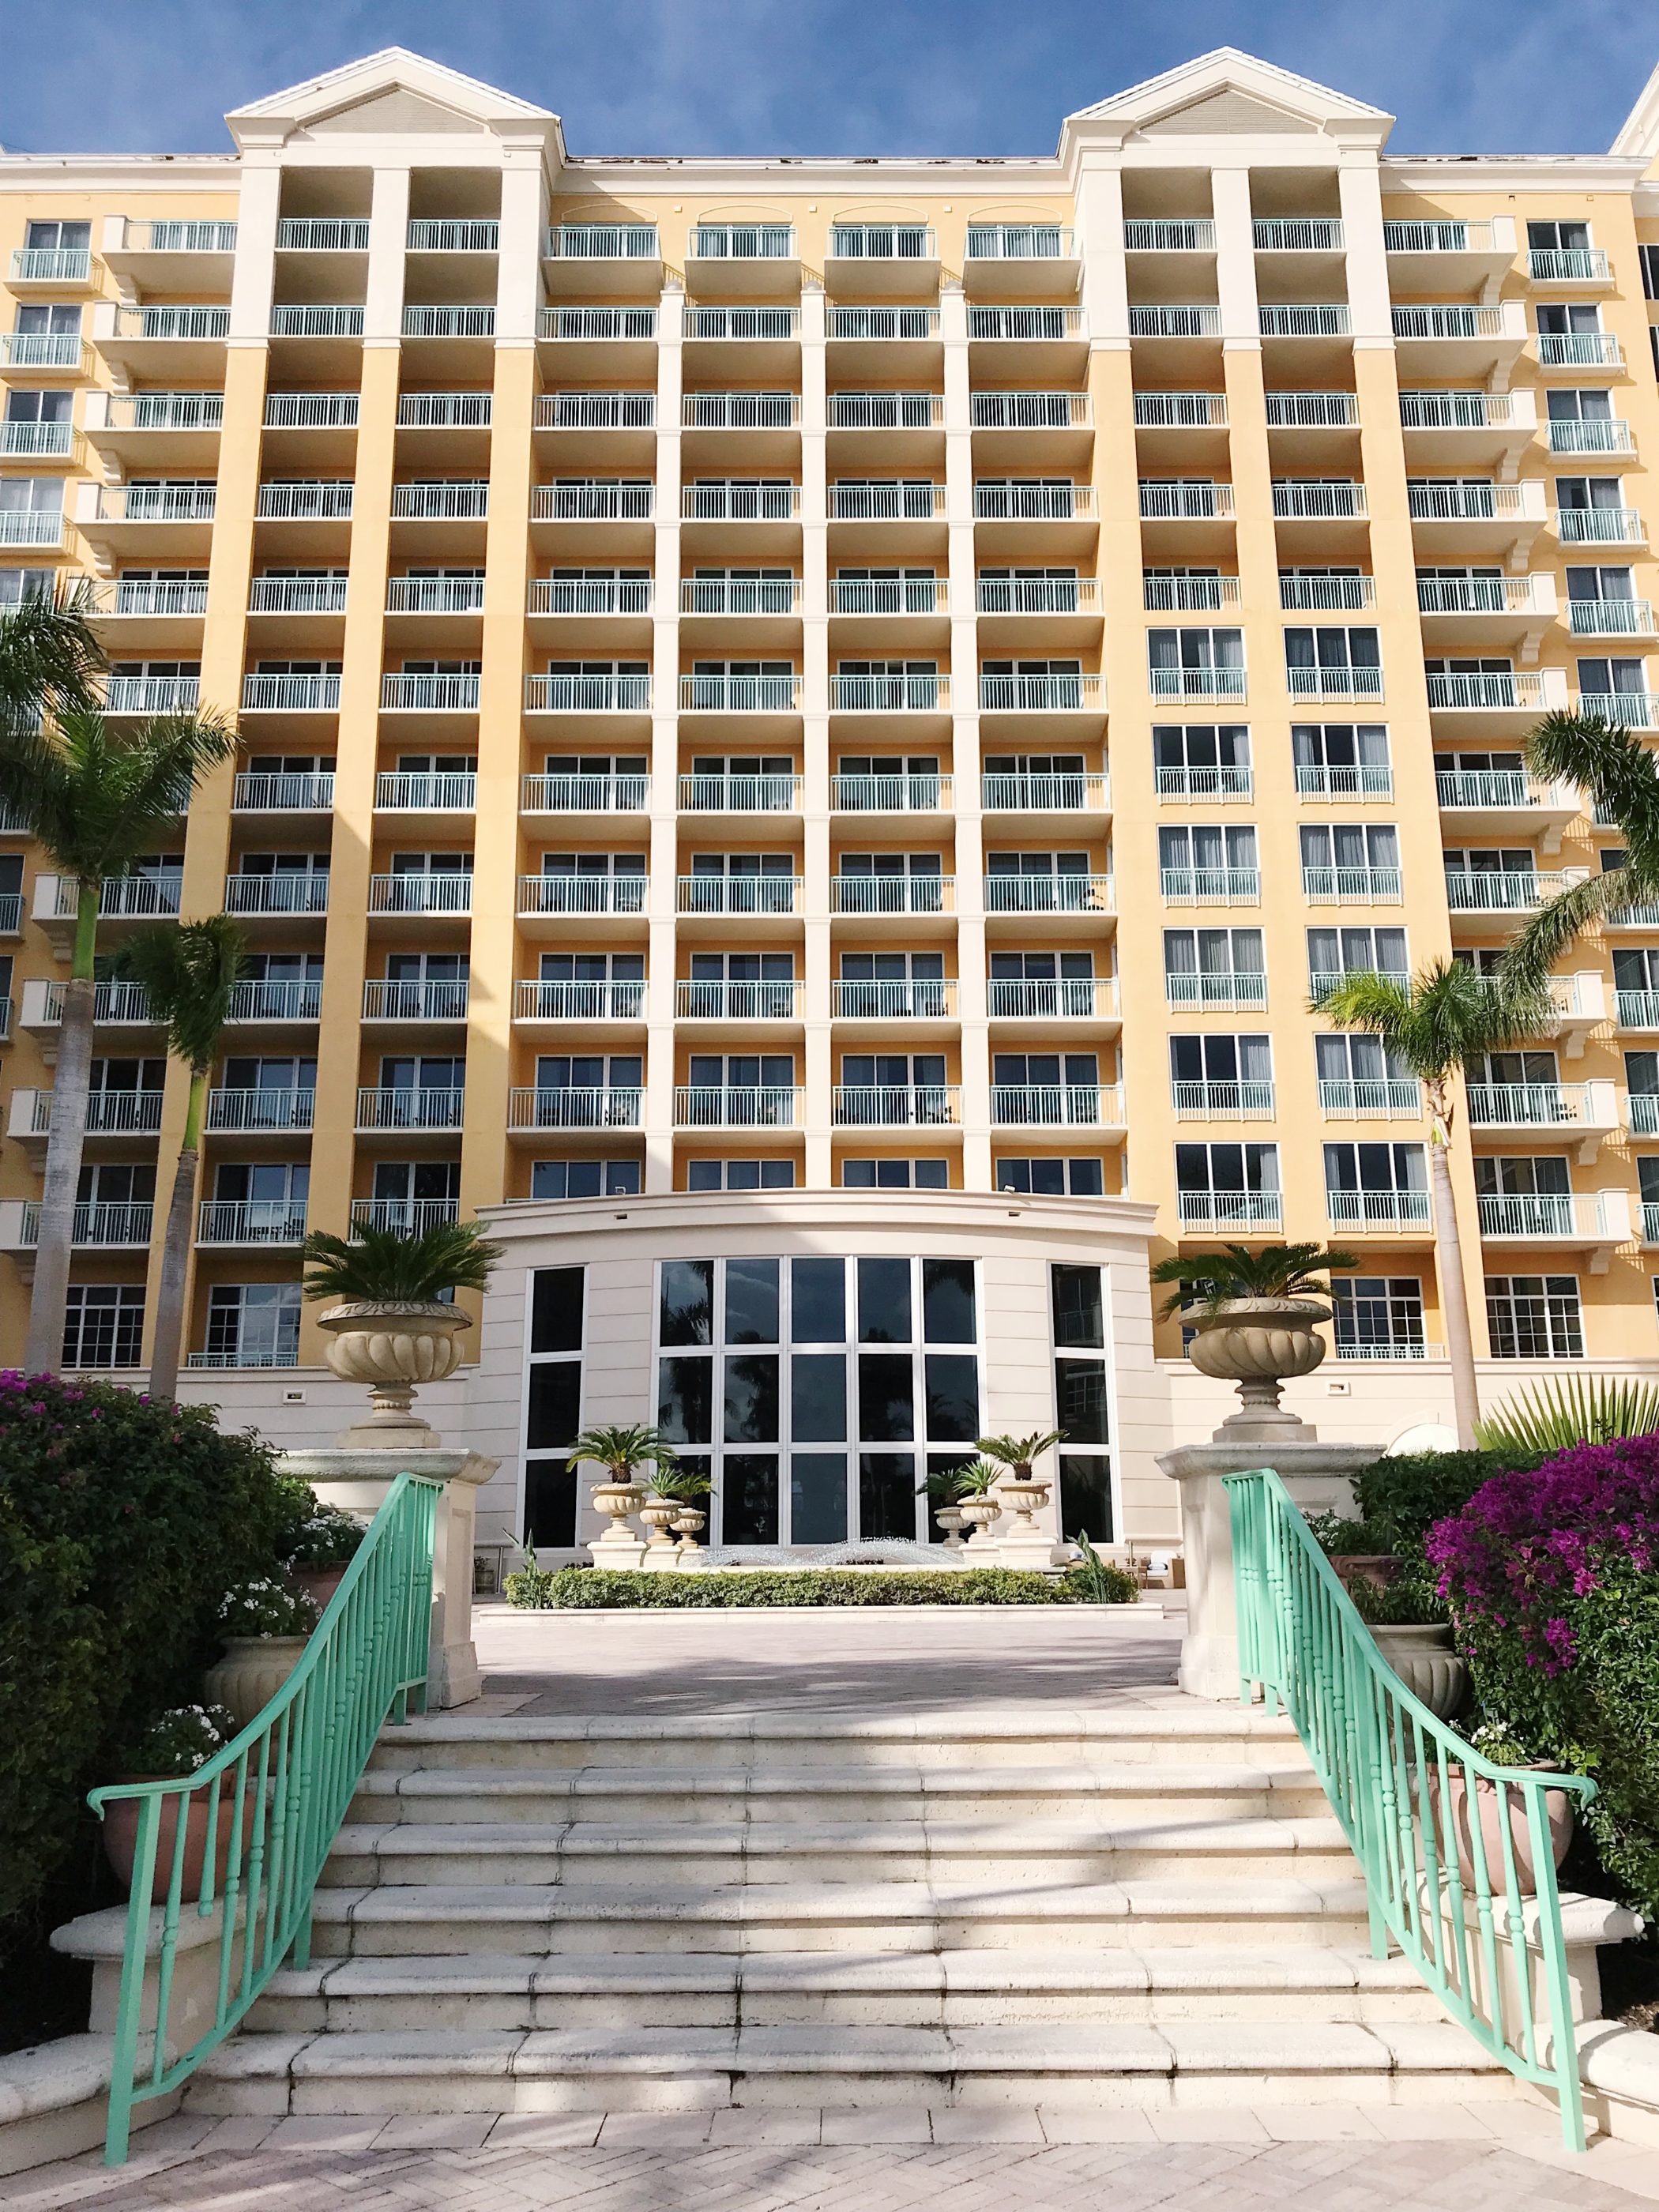 Amy shares her experience with her family at the Ritz Carlton in Key Biscayne.